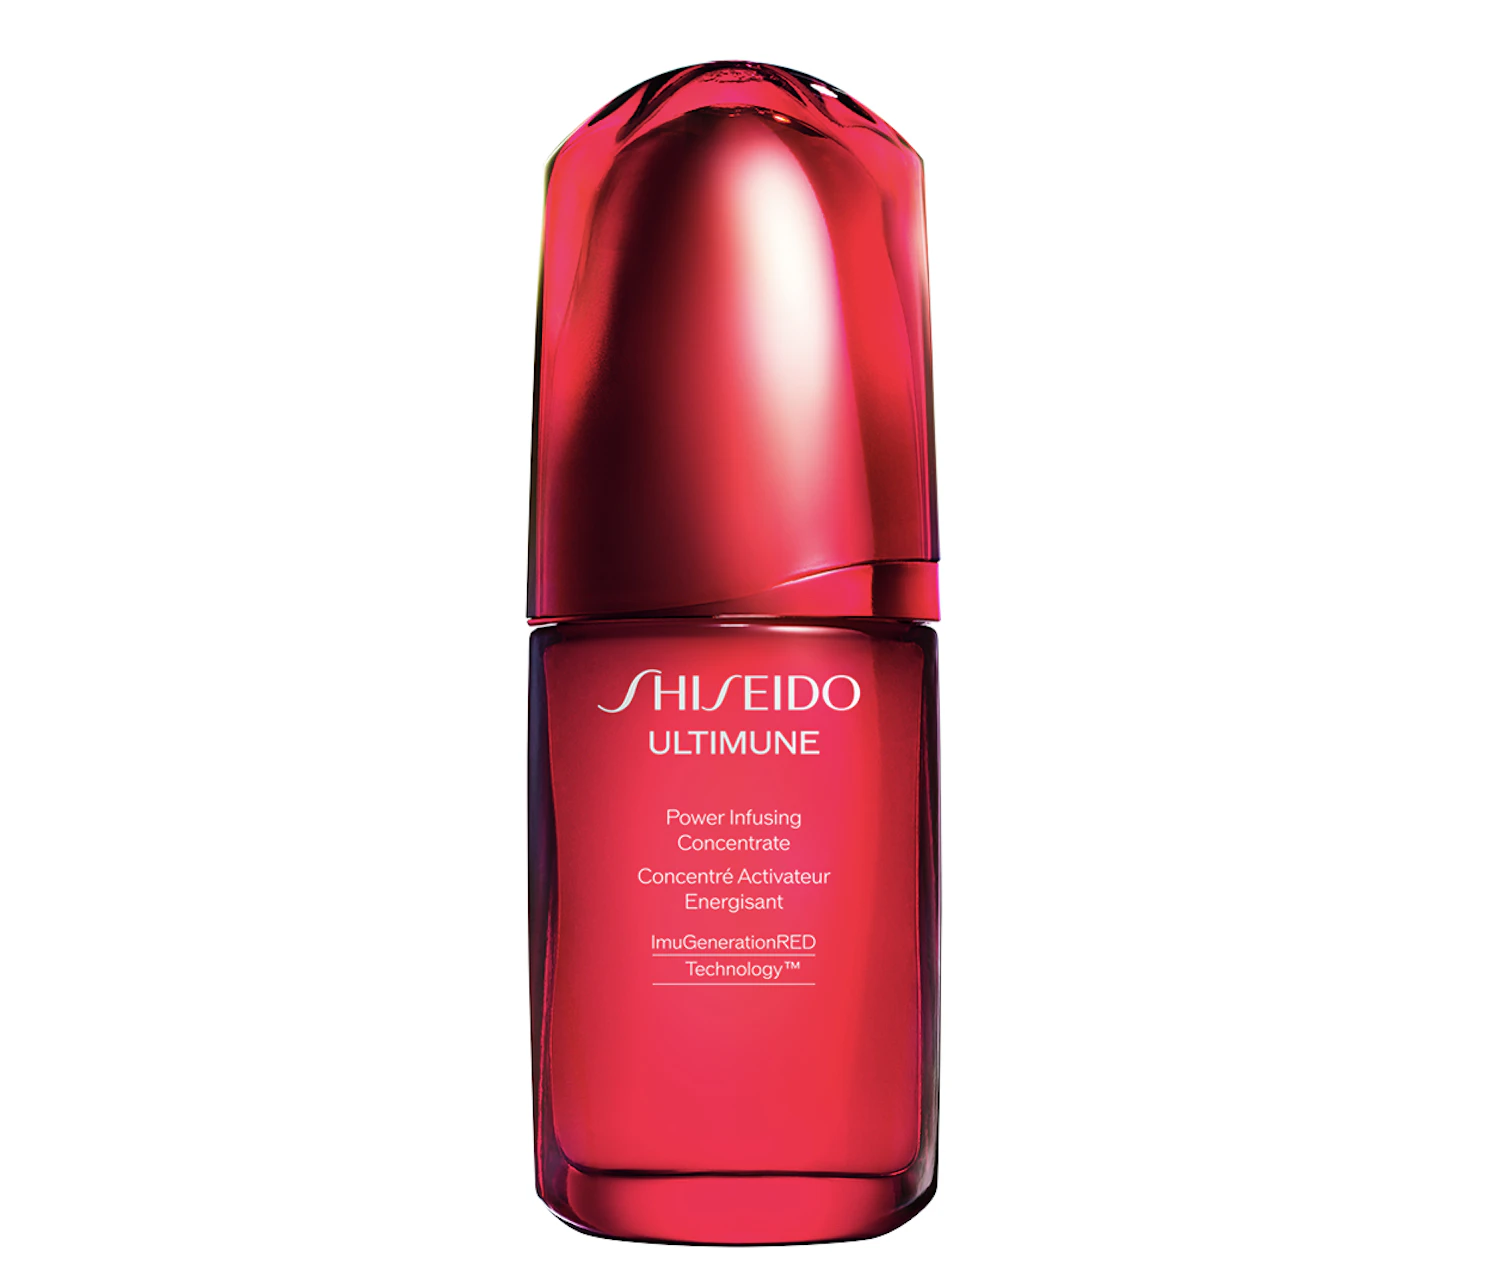 The award-winning "Ultimune Powerizing Concentrate Ⅲn" 50ml 13,200 yen (tax included)